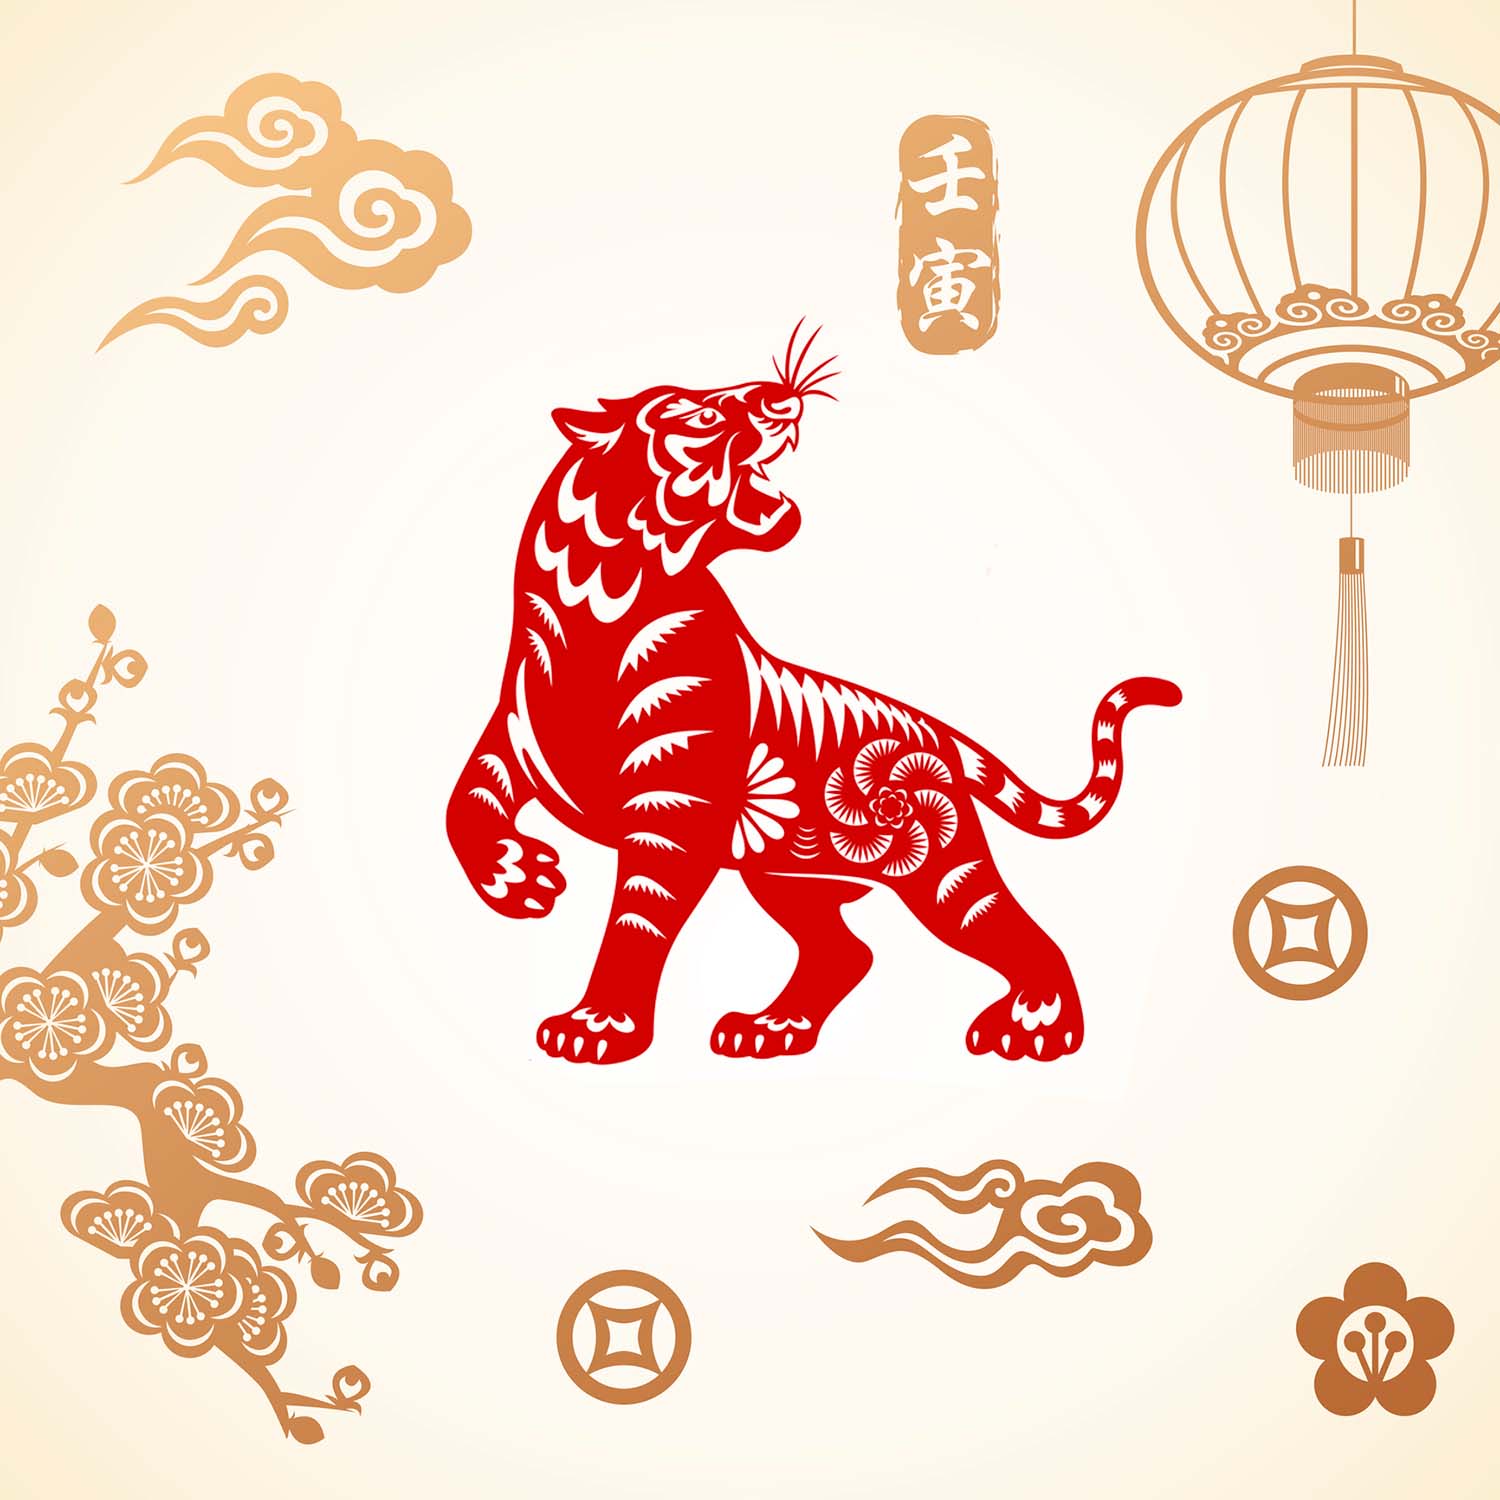 Year of the tiger illustration